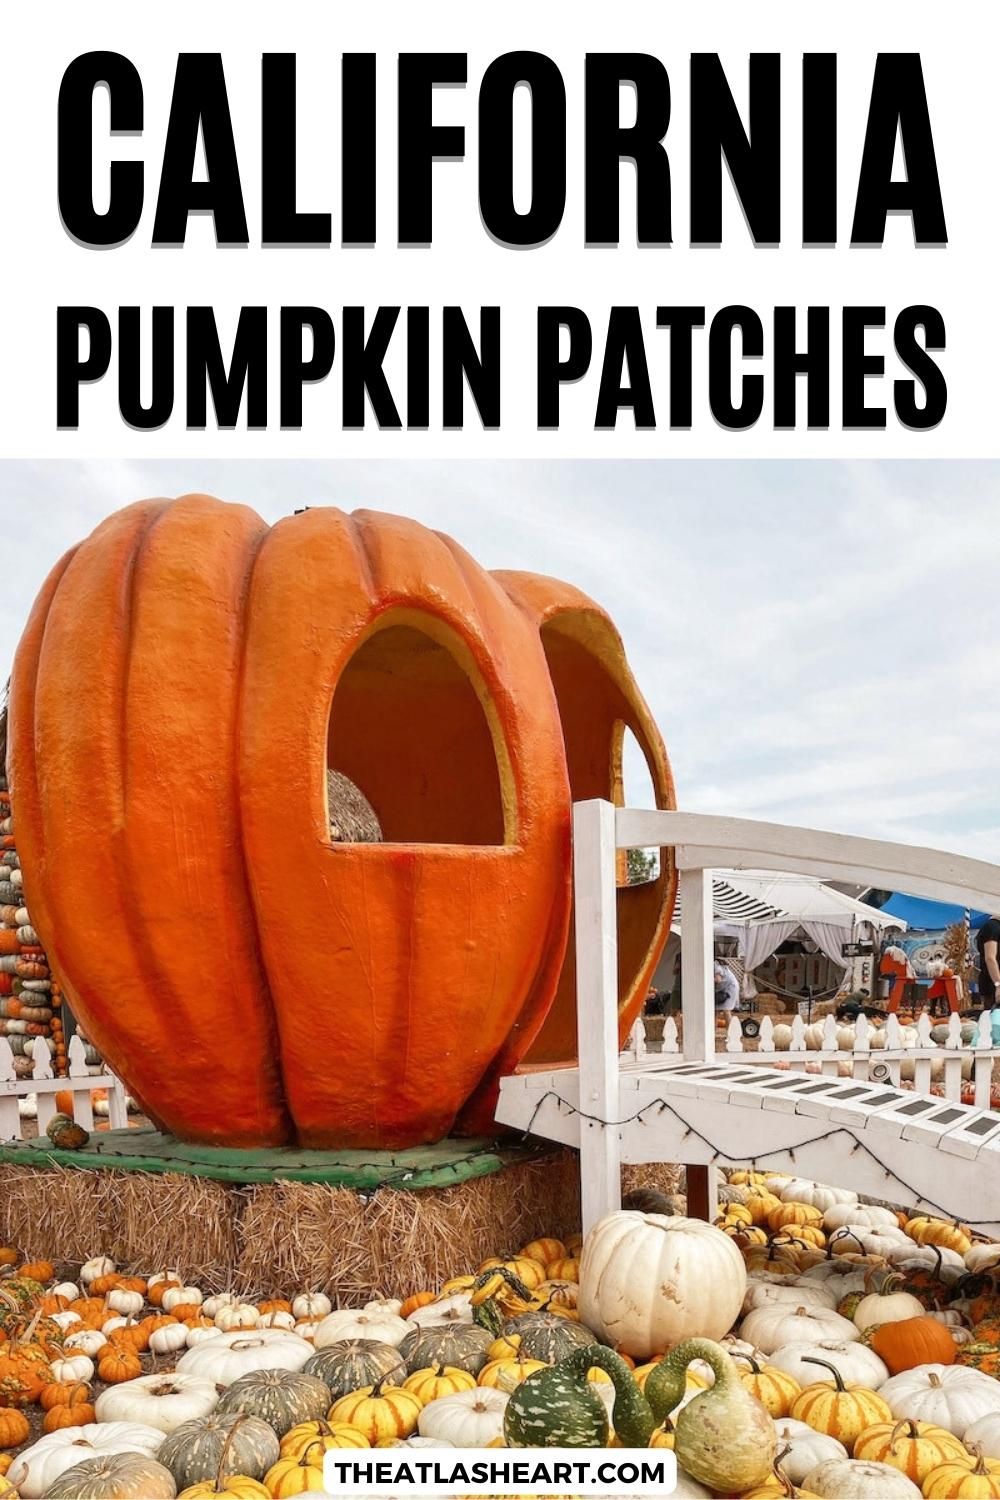 A white footbridge leading to a giant, fiberglass pumpkin-house surrounded by decorative gourds and pumpkins, with the text overlay, "California Pumpkin Patches."